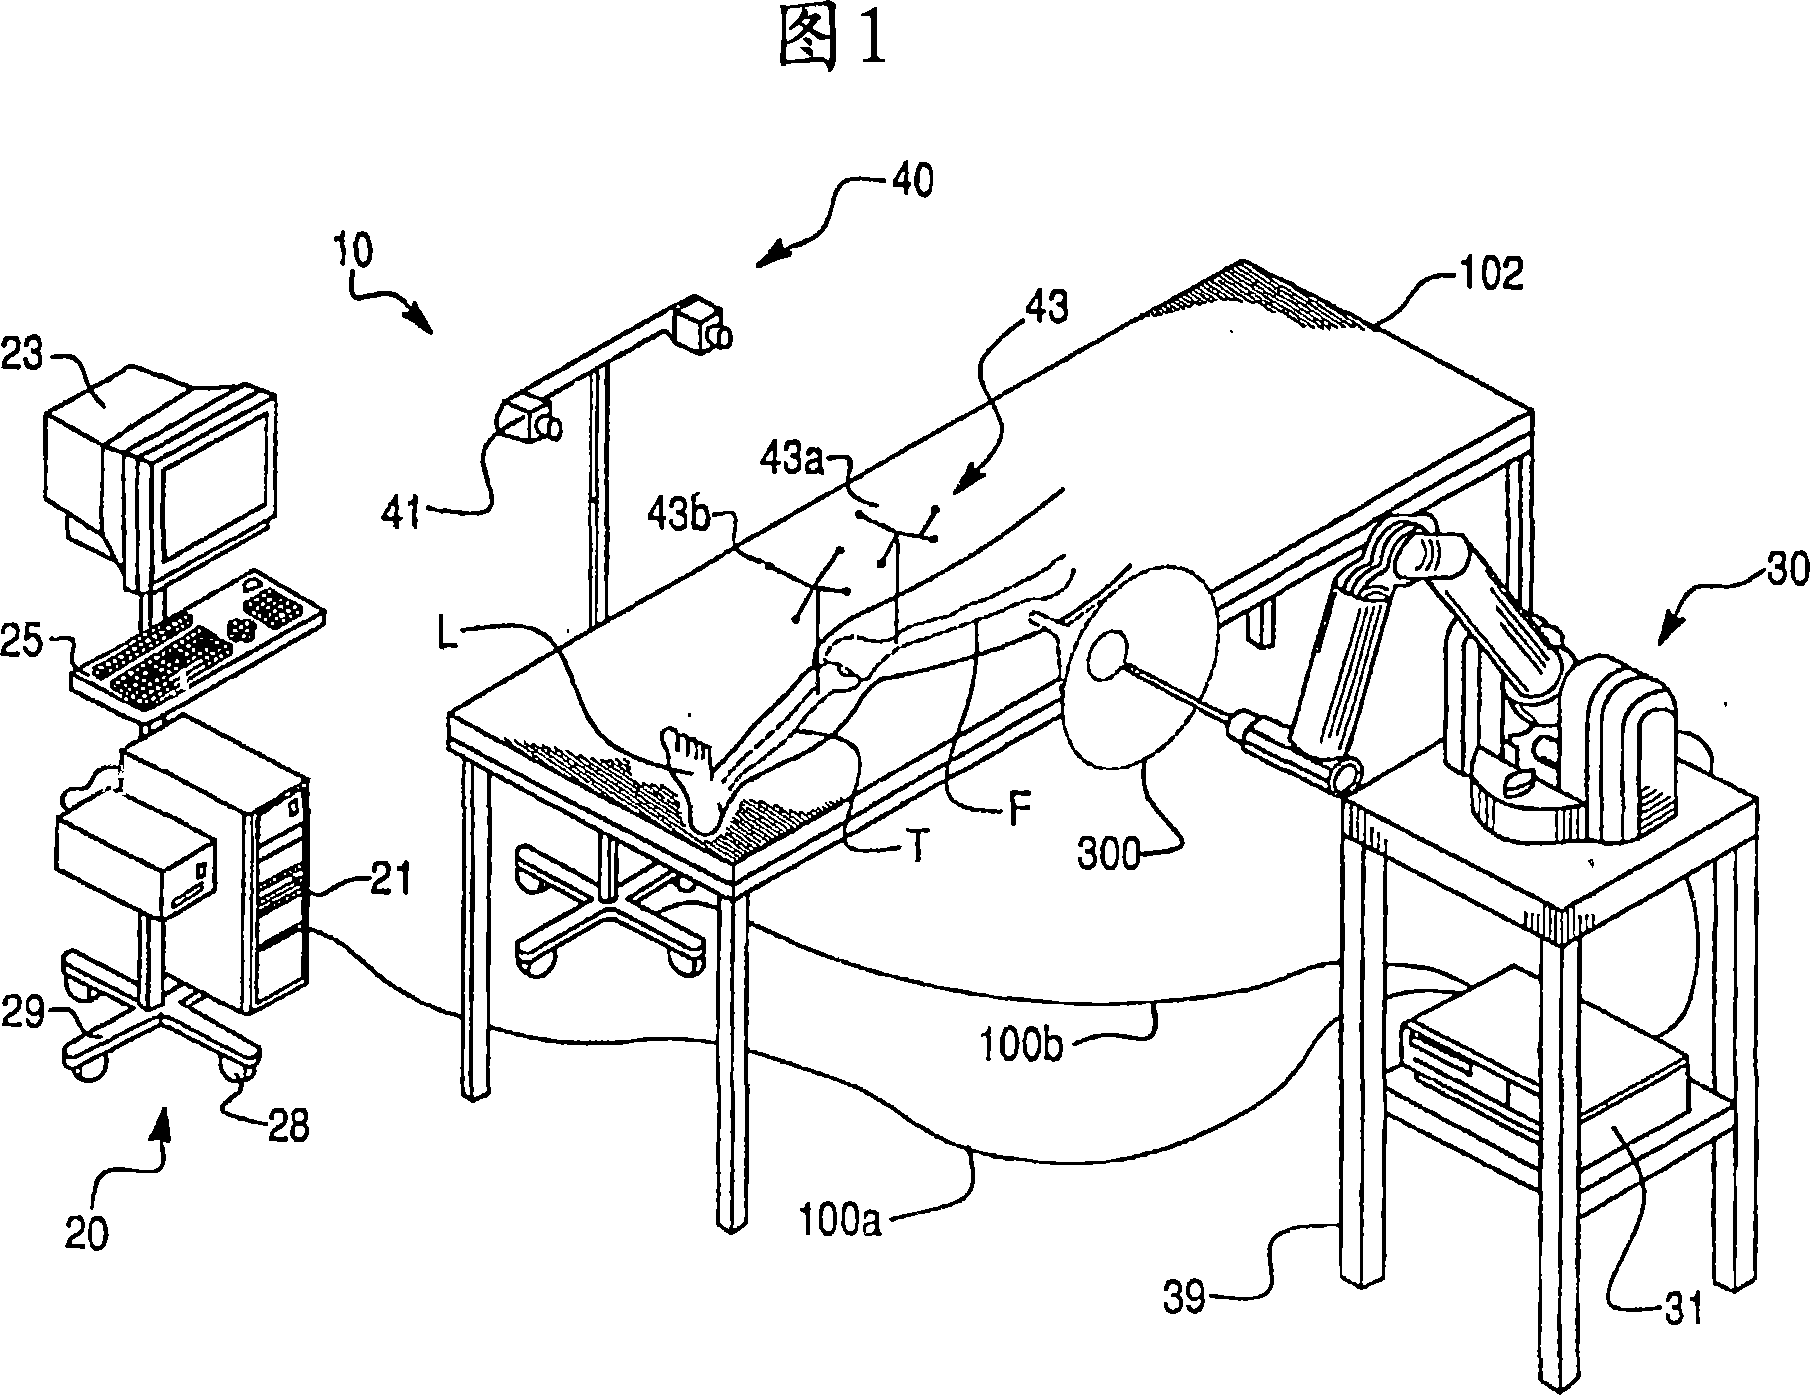 Haptic guidance system and method